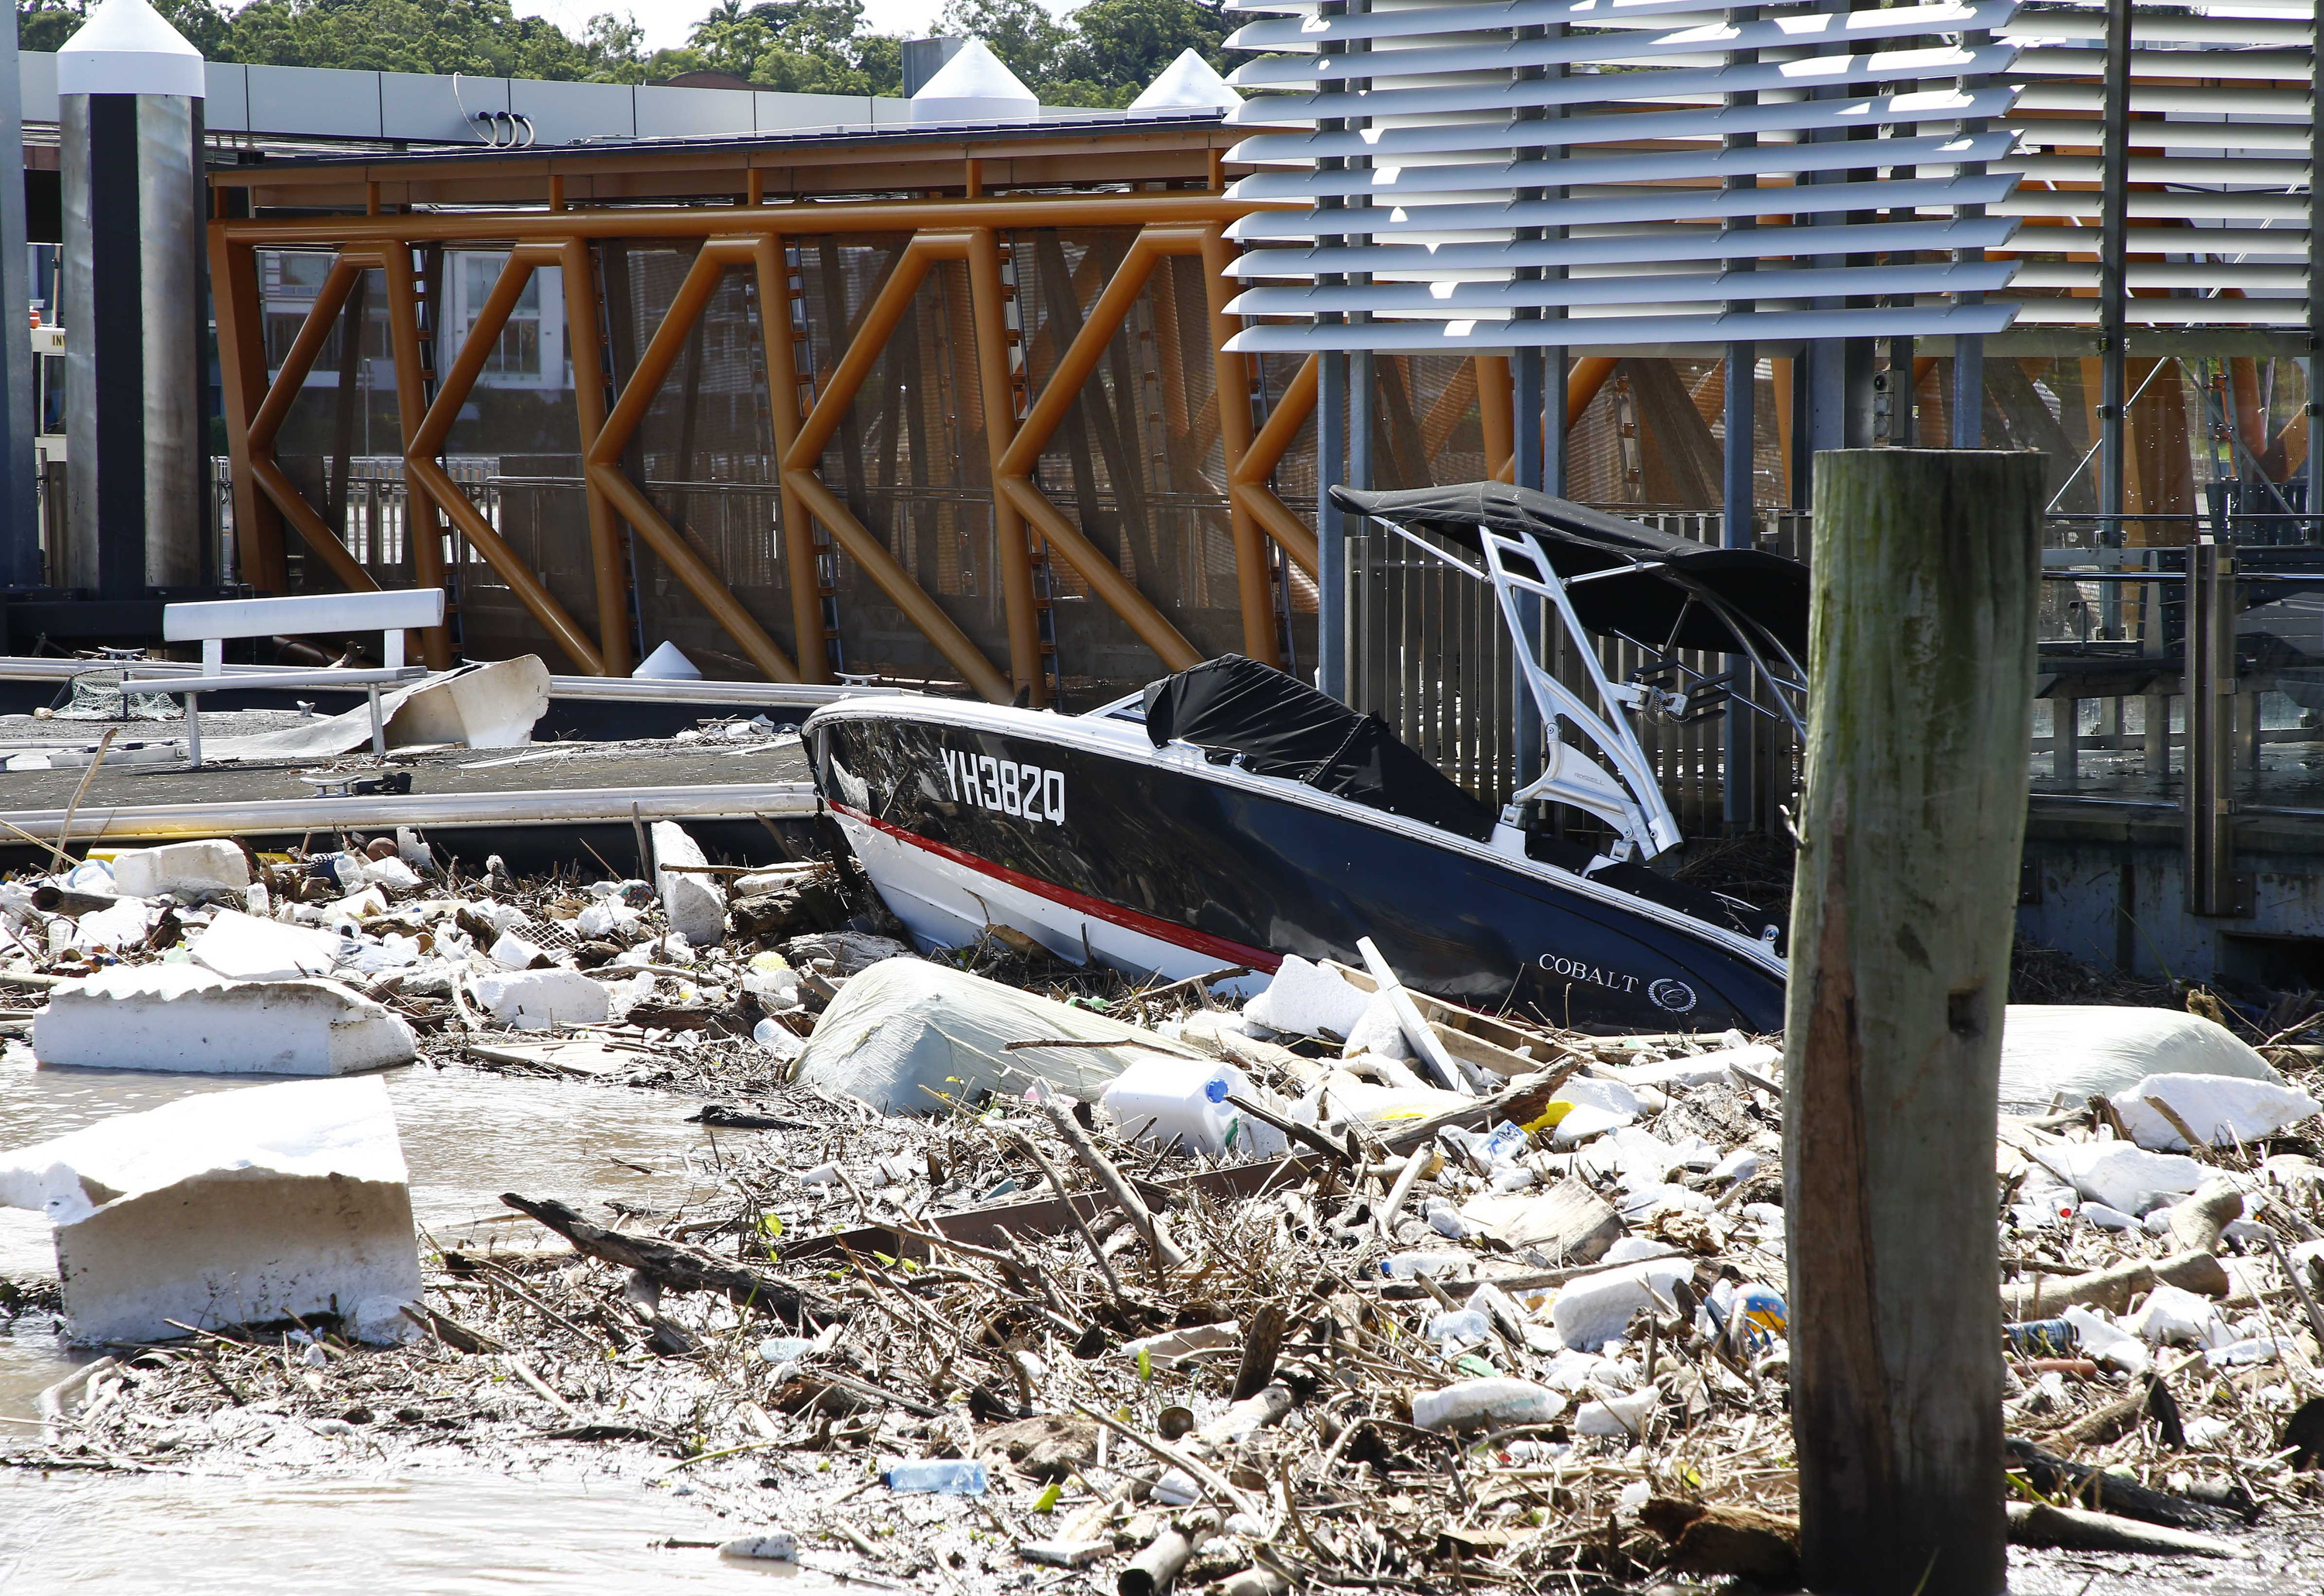 Wreckage are seen at the Hawthorne ferry terminal on the Brisbane river